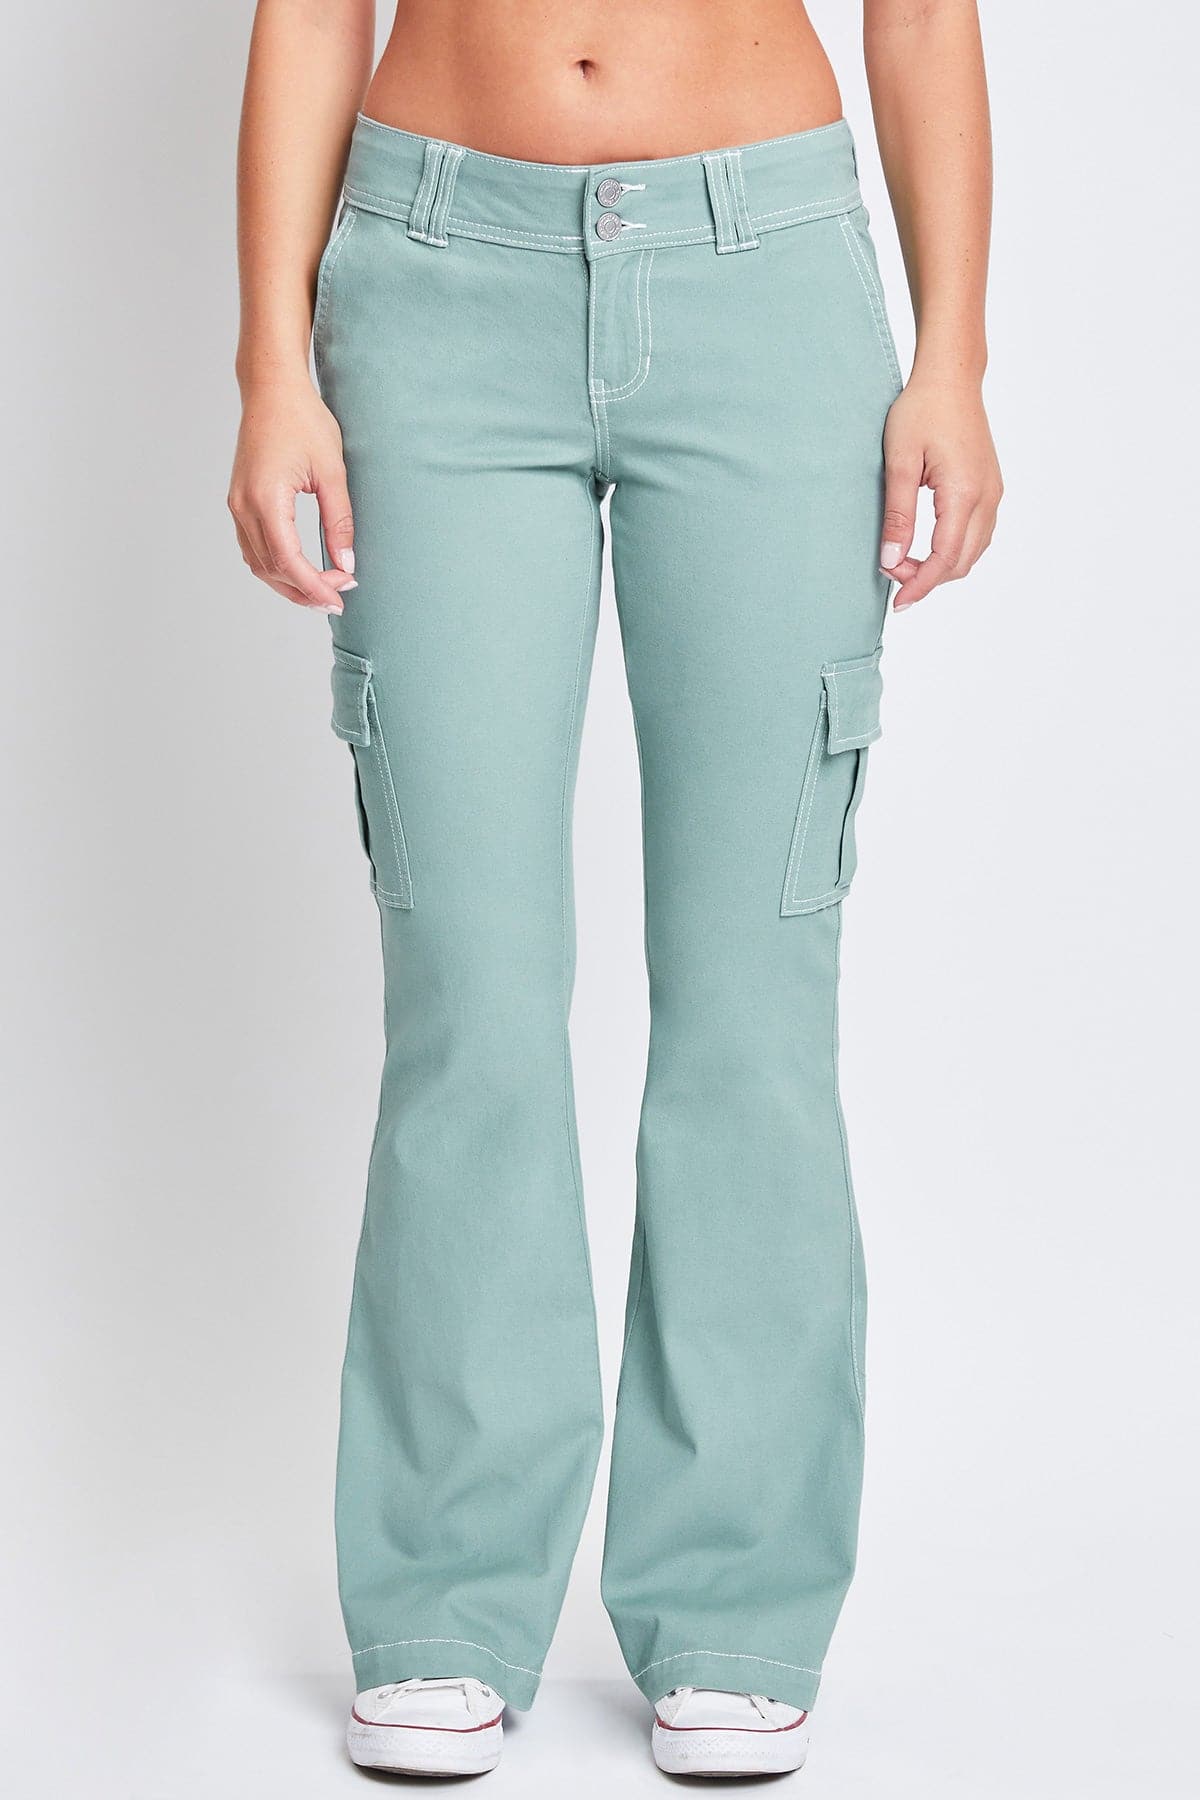 Women's 2 Button Low Rise Cargo Flare Pants from YMI – YMI JEANS